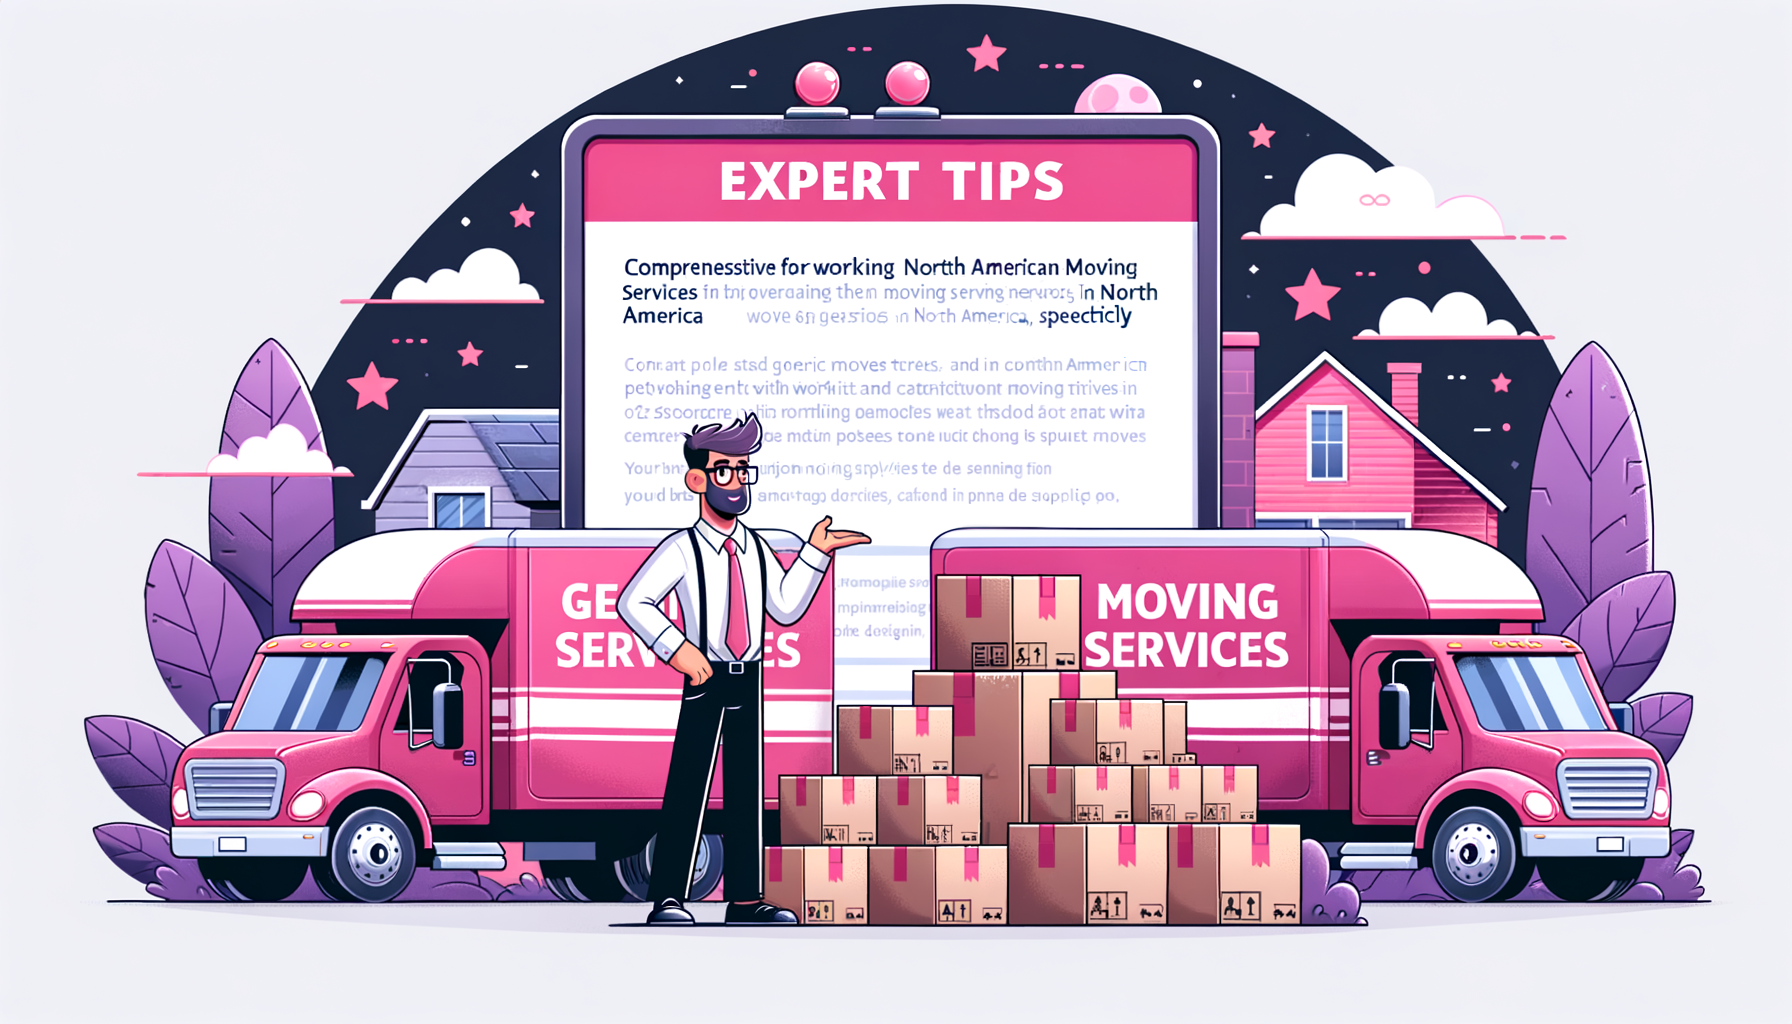 Fuschia-colored cartoon depicting an expert giving tips on working with North American Moving Services, with moving trucks and packed boxes illustrated in a fun and engaging style.